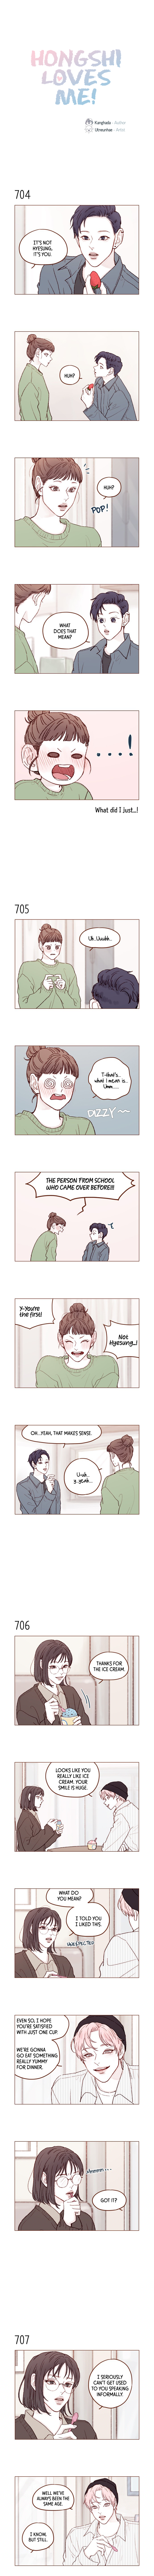 Hongshi Loves Me! Chapter 110: Tch, Getting All Embarassed. - Picture 1